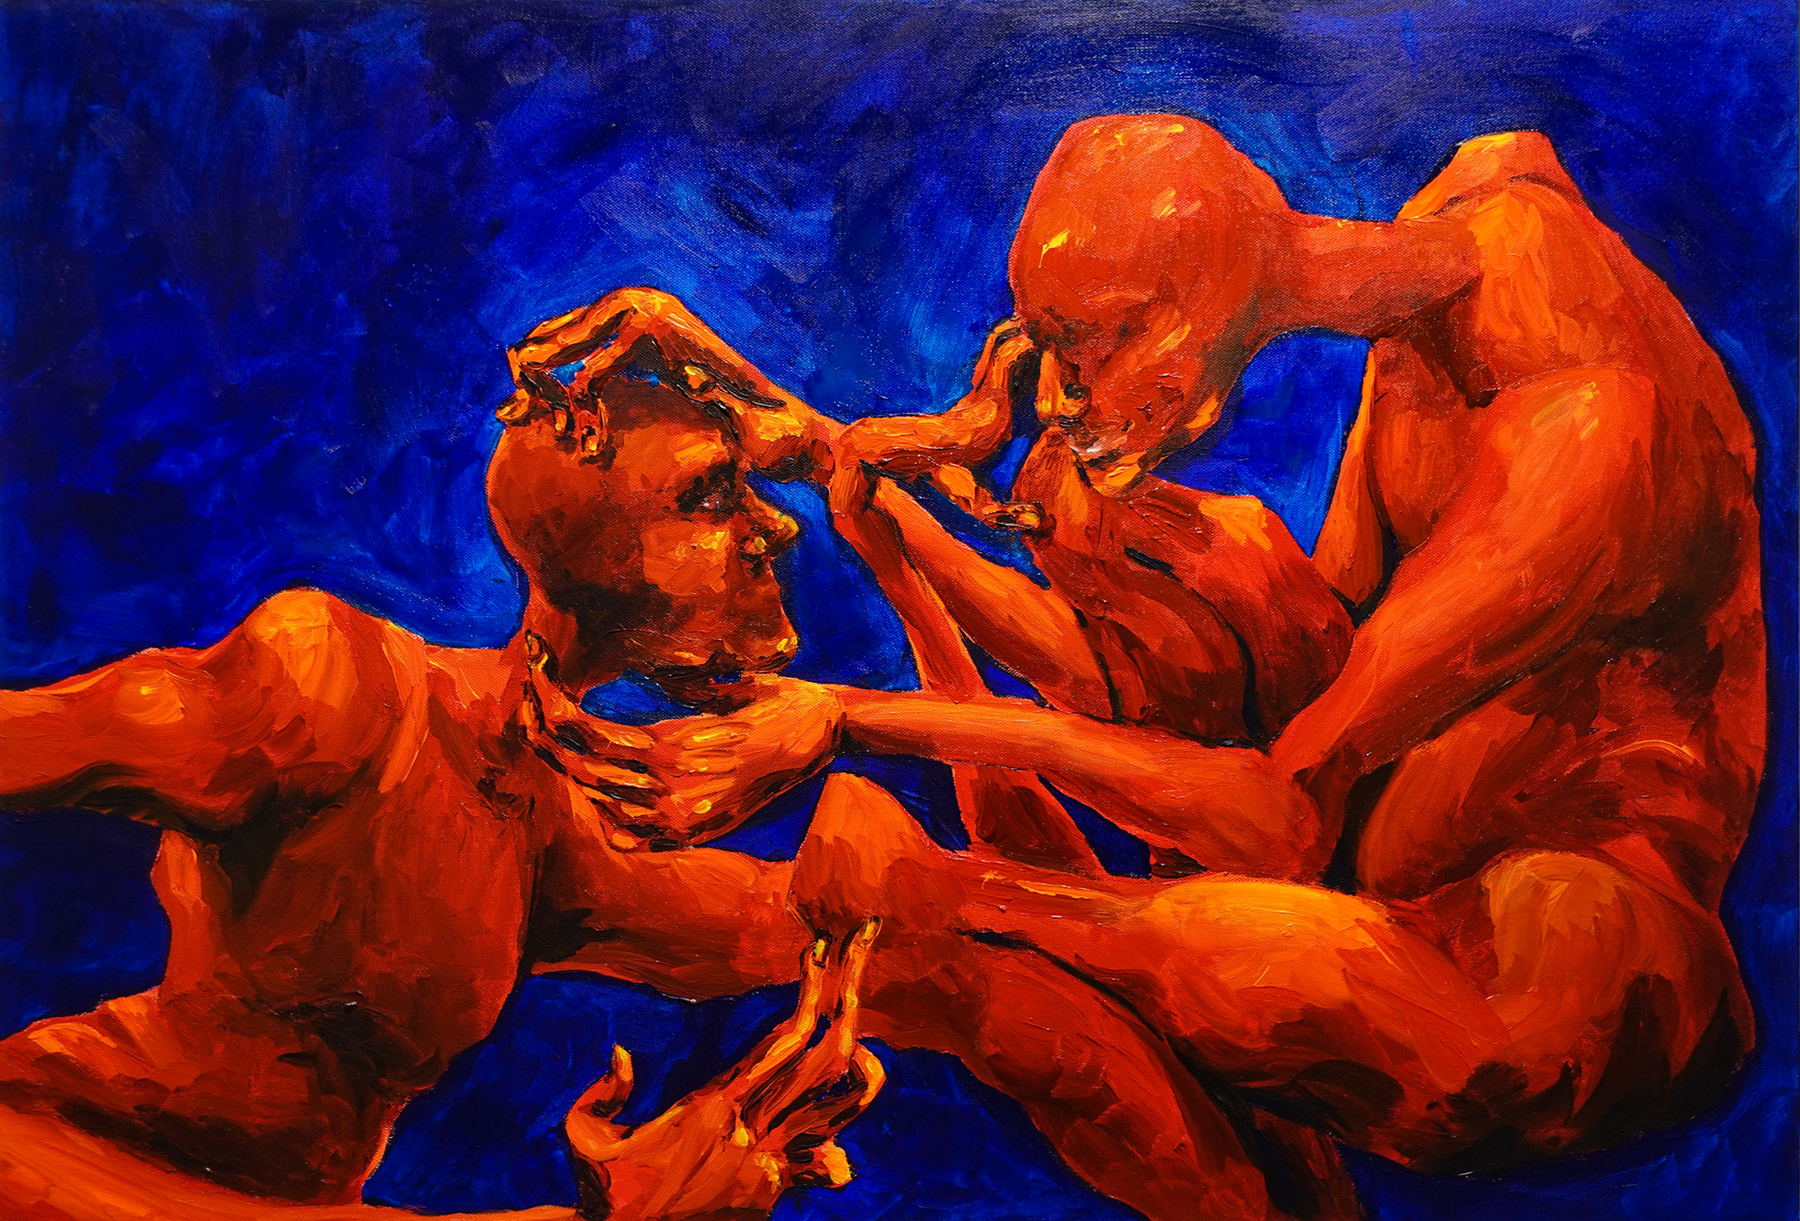 Two vibrant orange contorted figures examining each others' faces. Image courtesy of Daniell Stromanthe